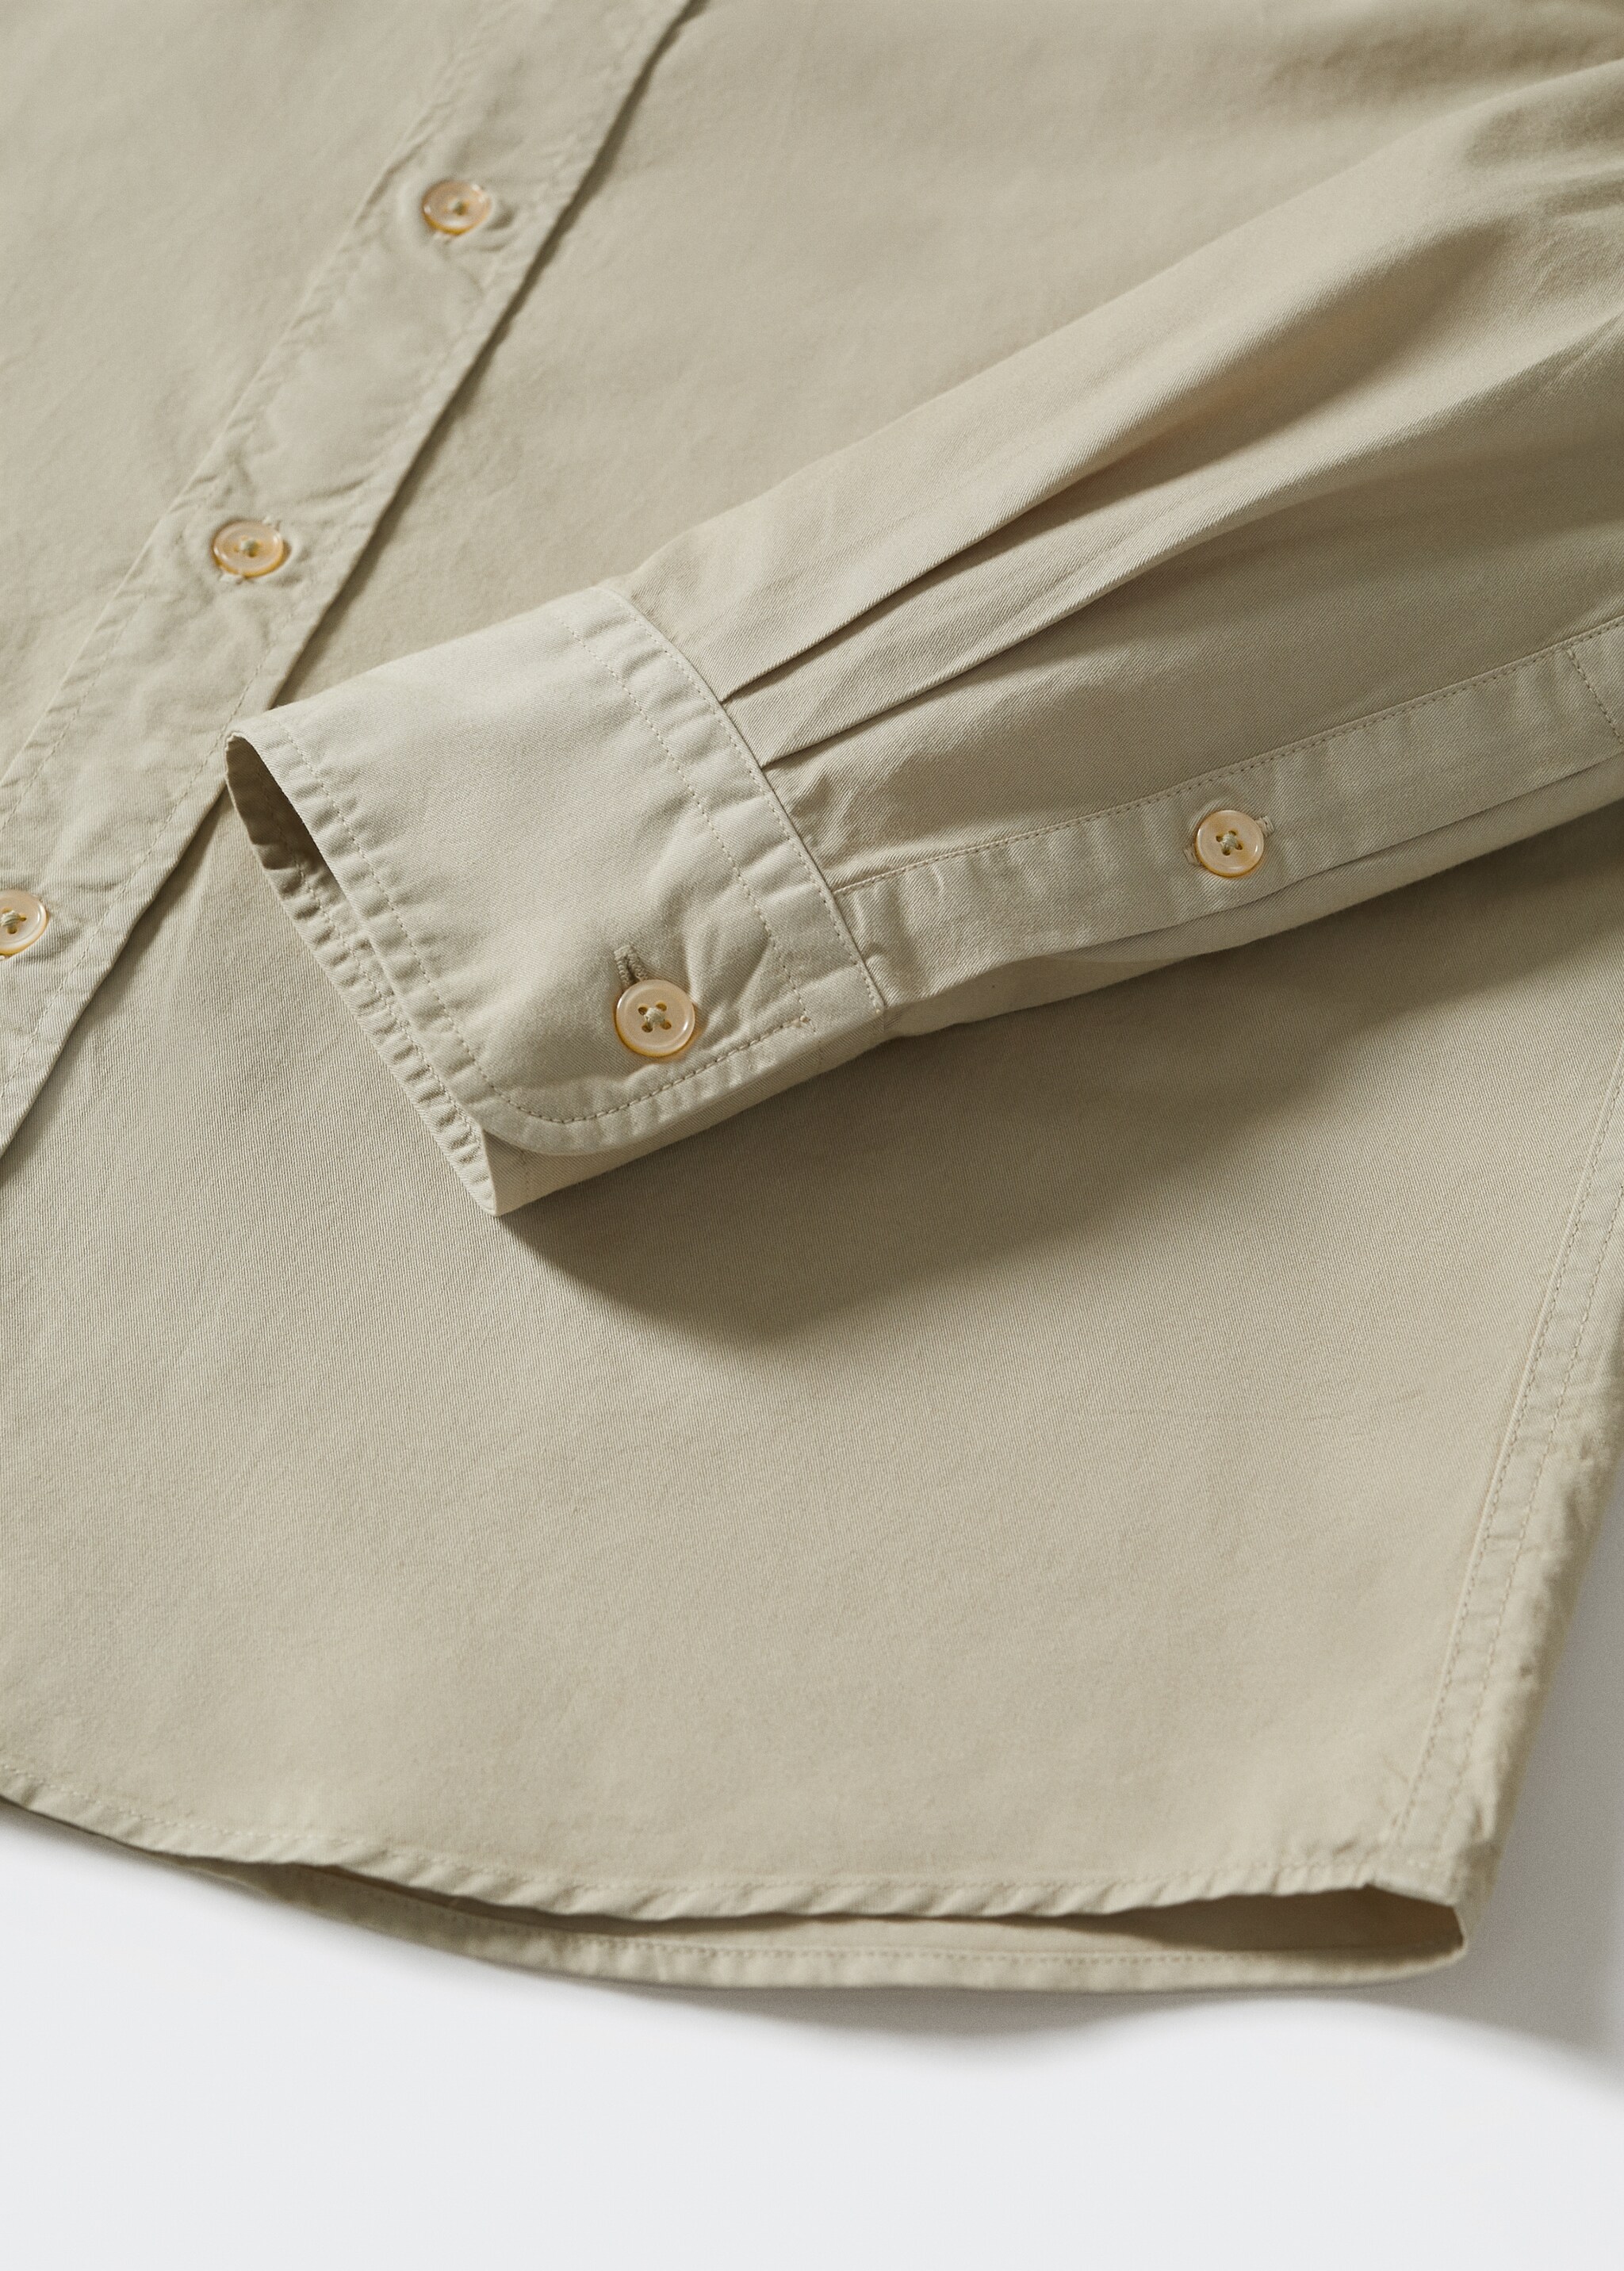 Slim fit cotton shirt - Details of the article 7